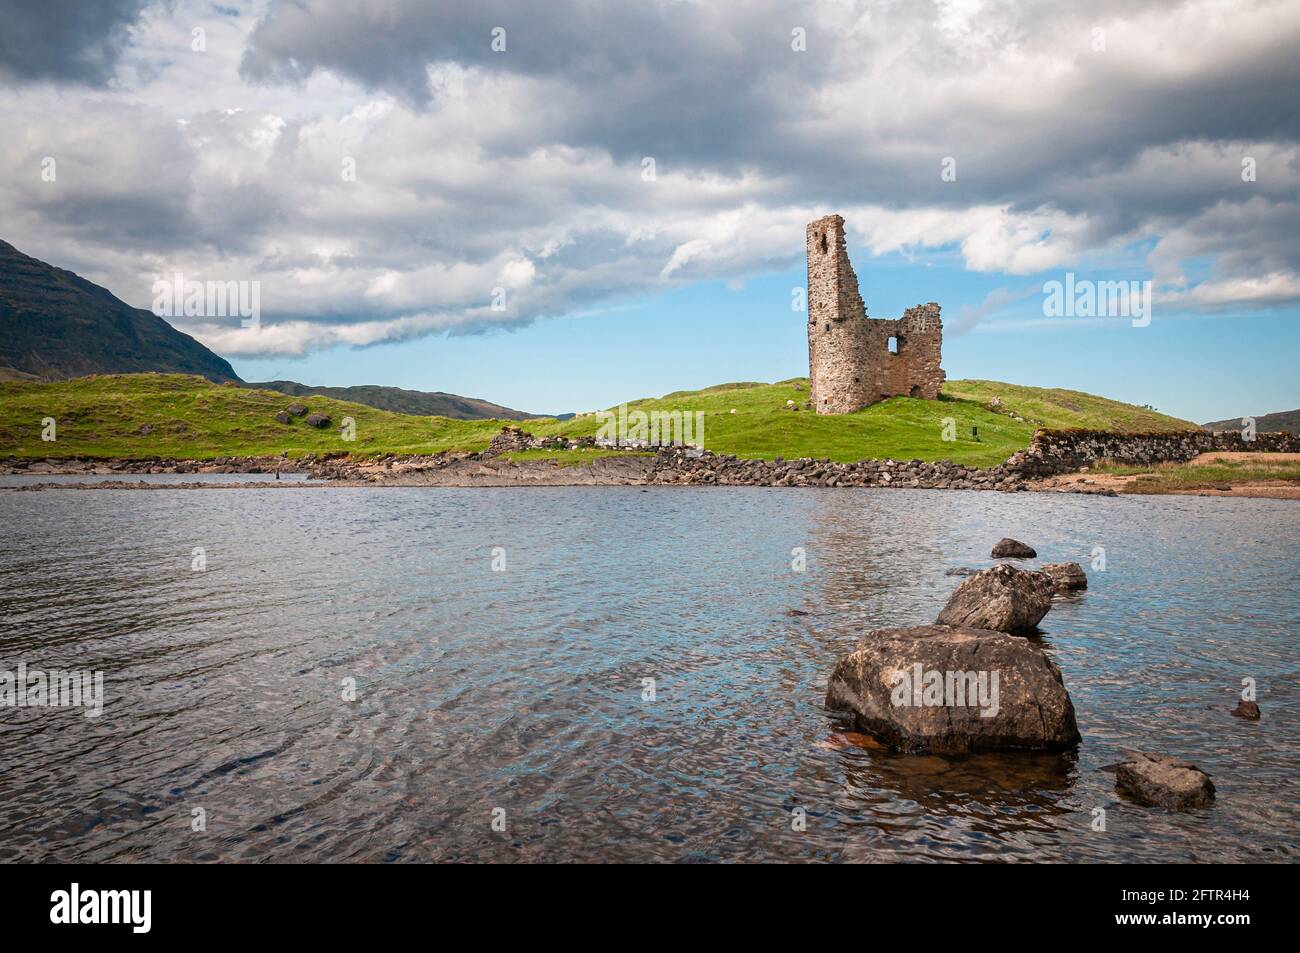 A summer 3 shot HDR image of Ardvreck Castle on the shores of Loch Assynt, Sutherland in the Highlands of Scotland. 27 May 2014 Stock Photo